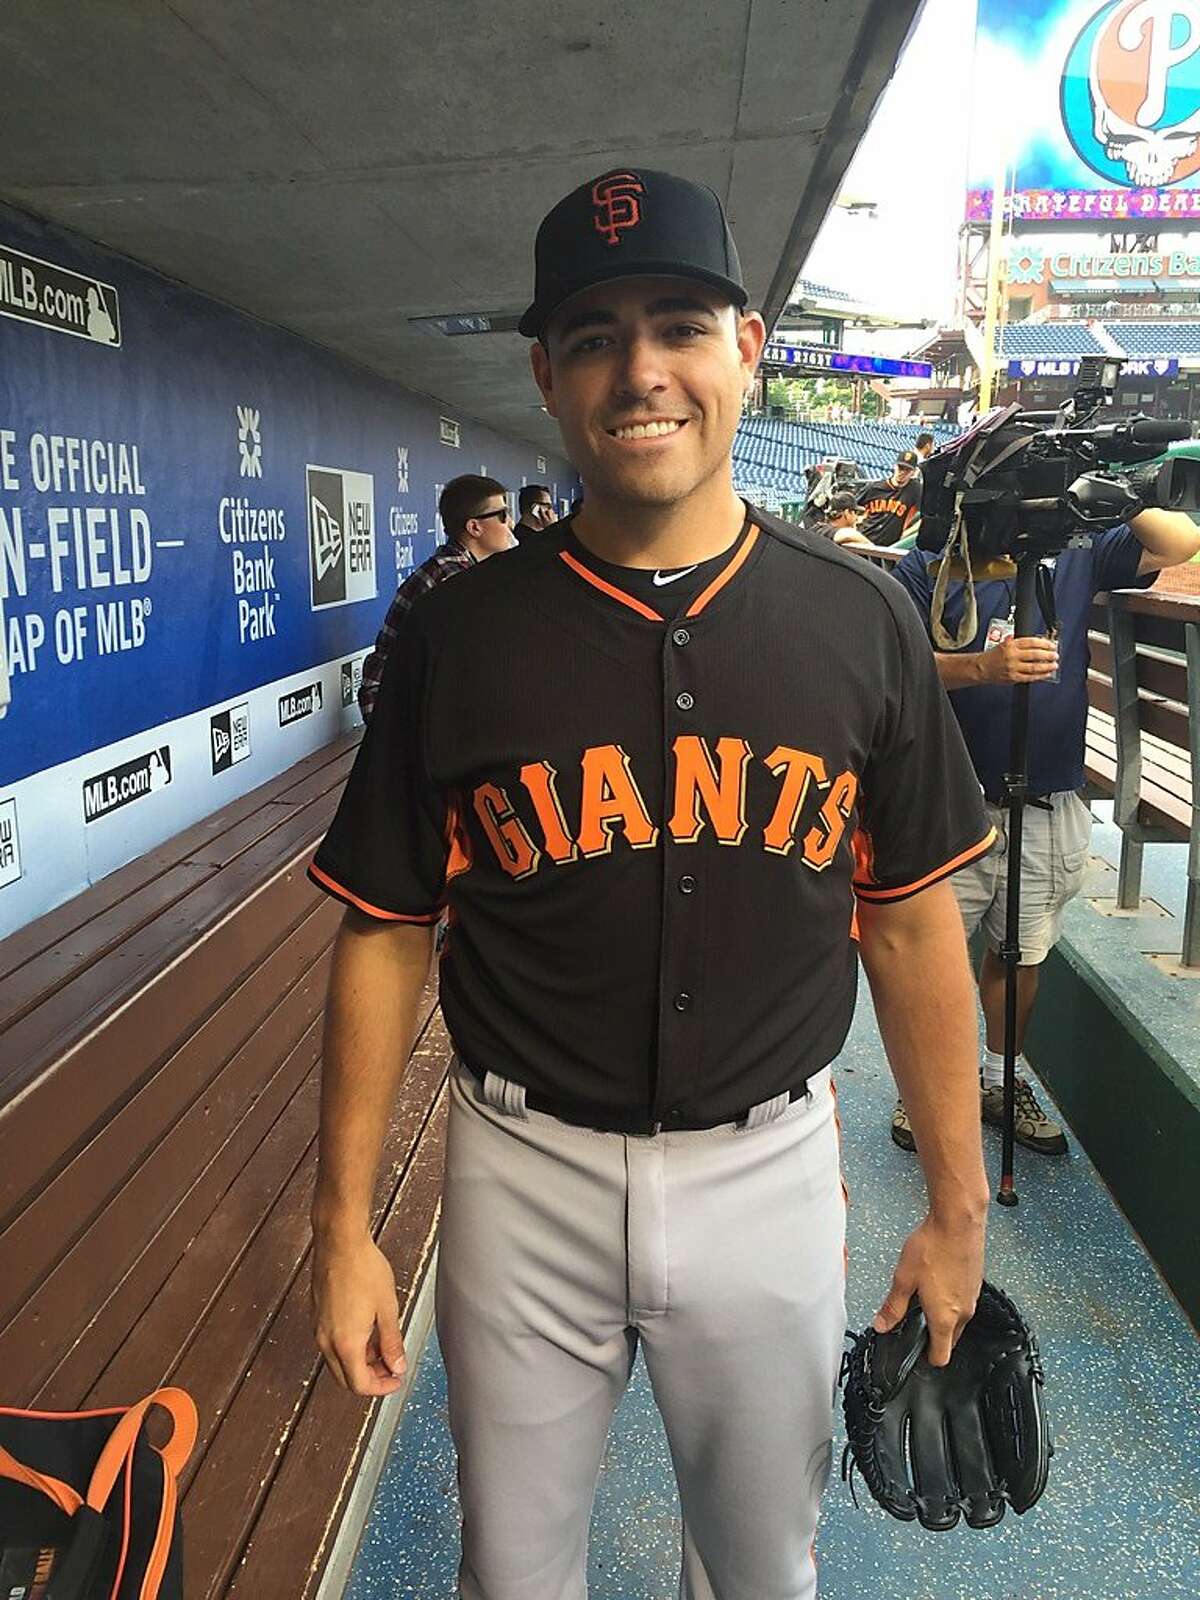 Starting pitcher Matt Moore, acquired by the Giants from Tampa Bay on Monday in exchange for third baseman Matt Duffy and prospects, joined his new team on the road Tuesday in Philadelphia.